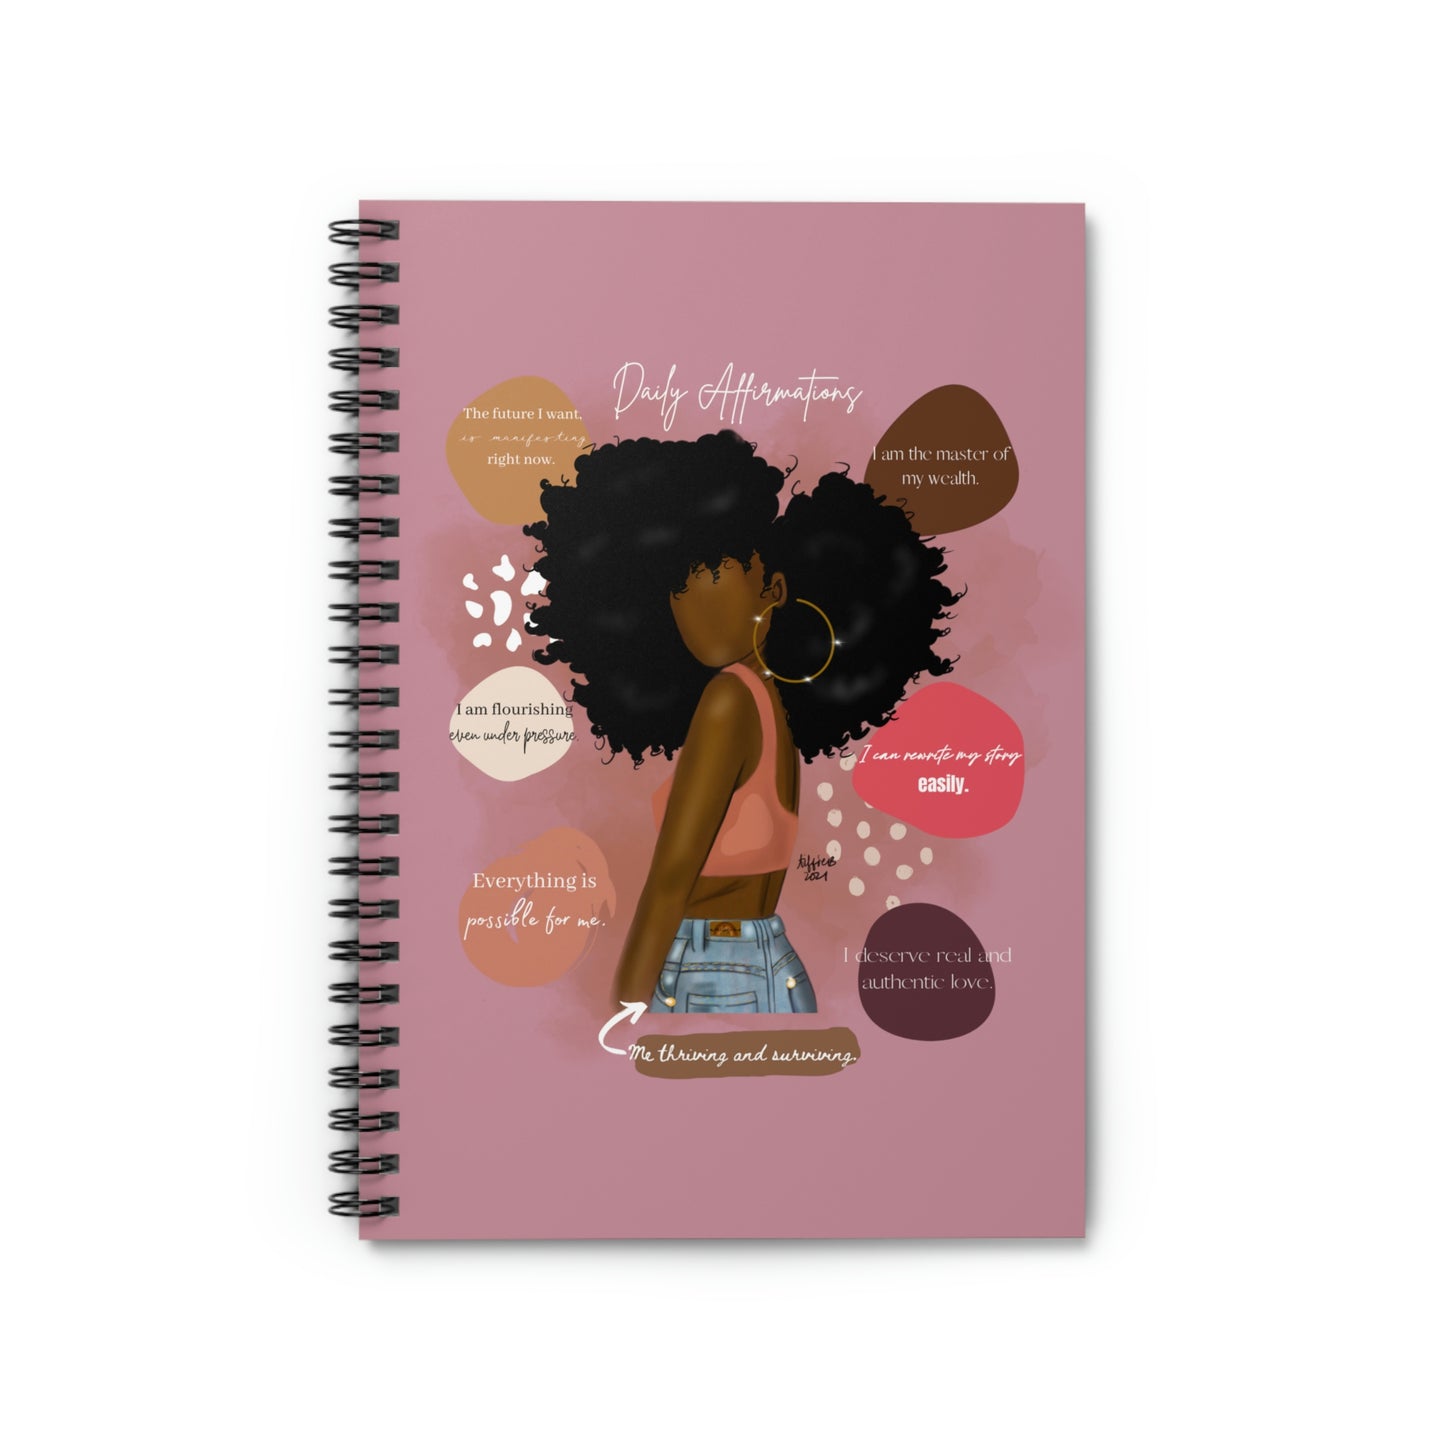 Daily Affirmations Spiral Notebook - Ruled Line